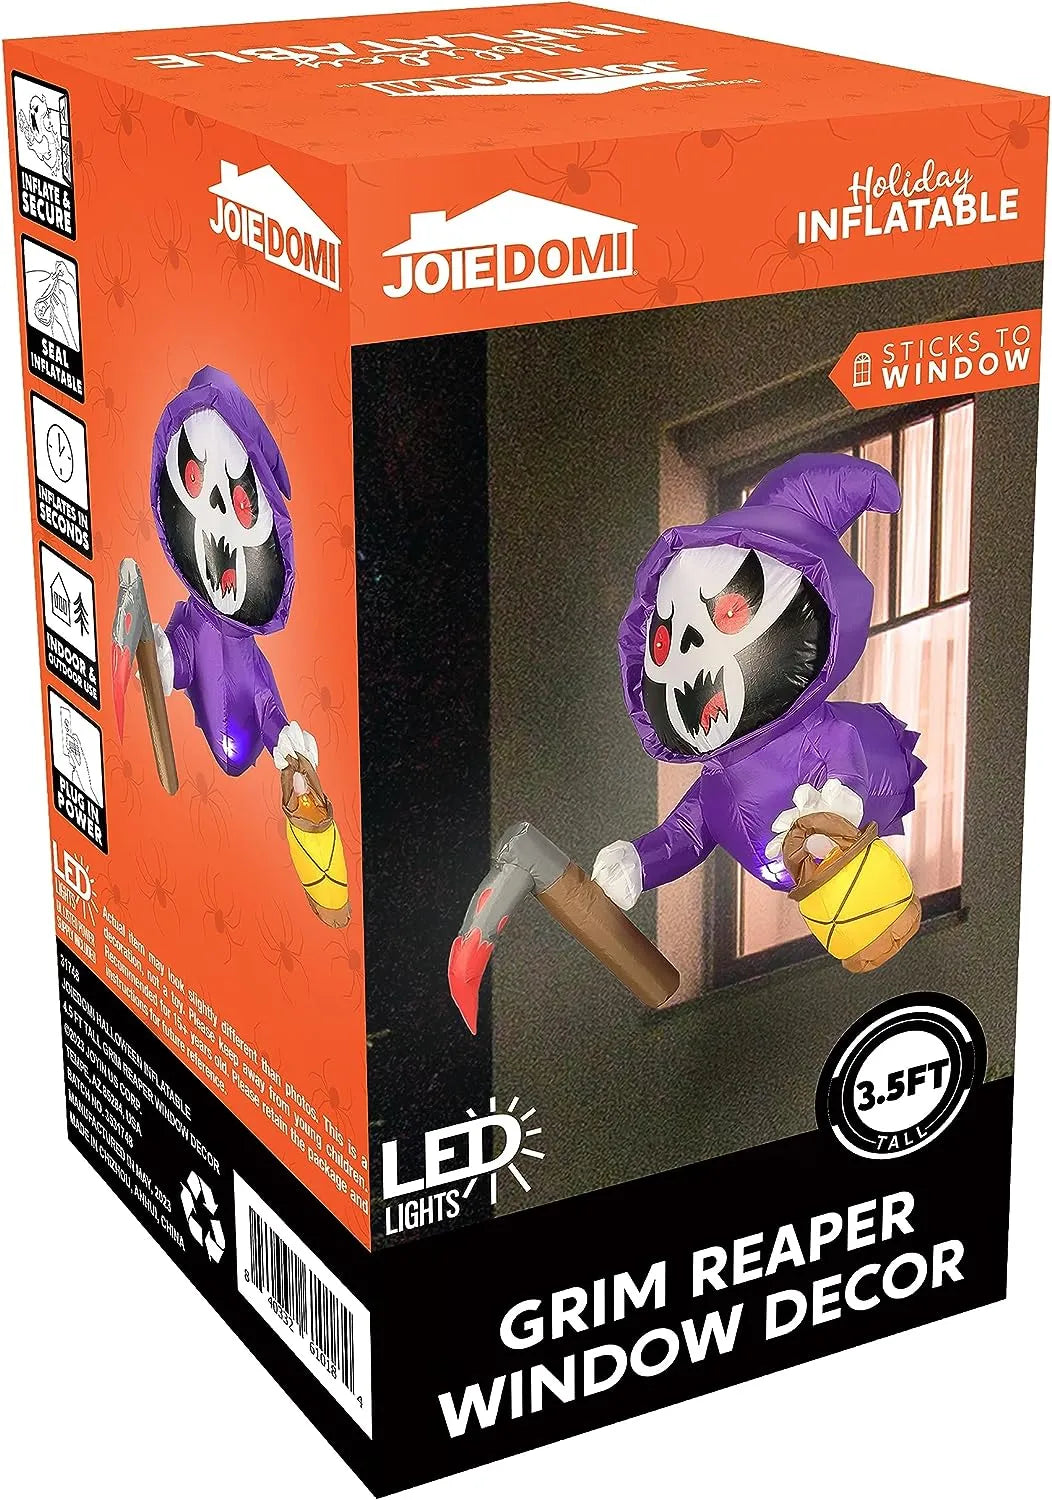 Joiedomi 4.5ft Halloween Inflatable Grim Reaper Broke Out